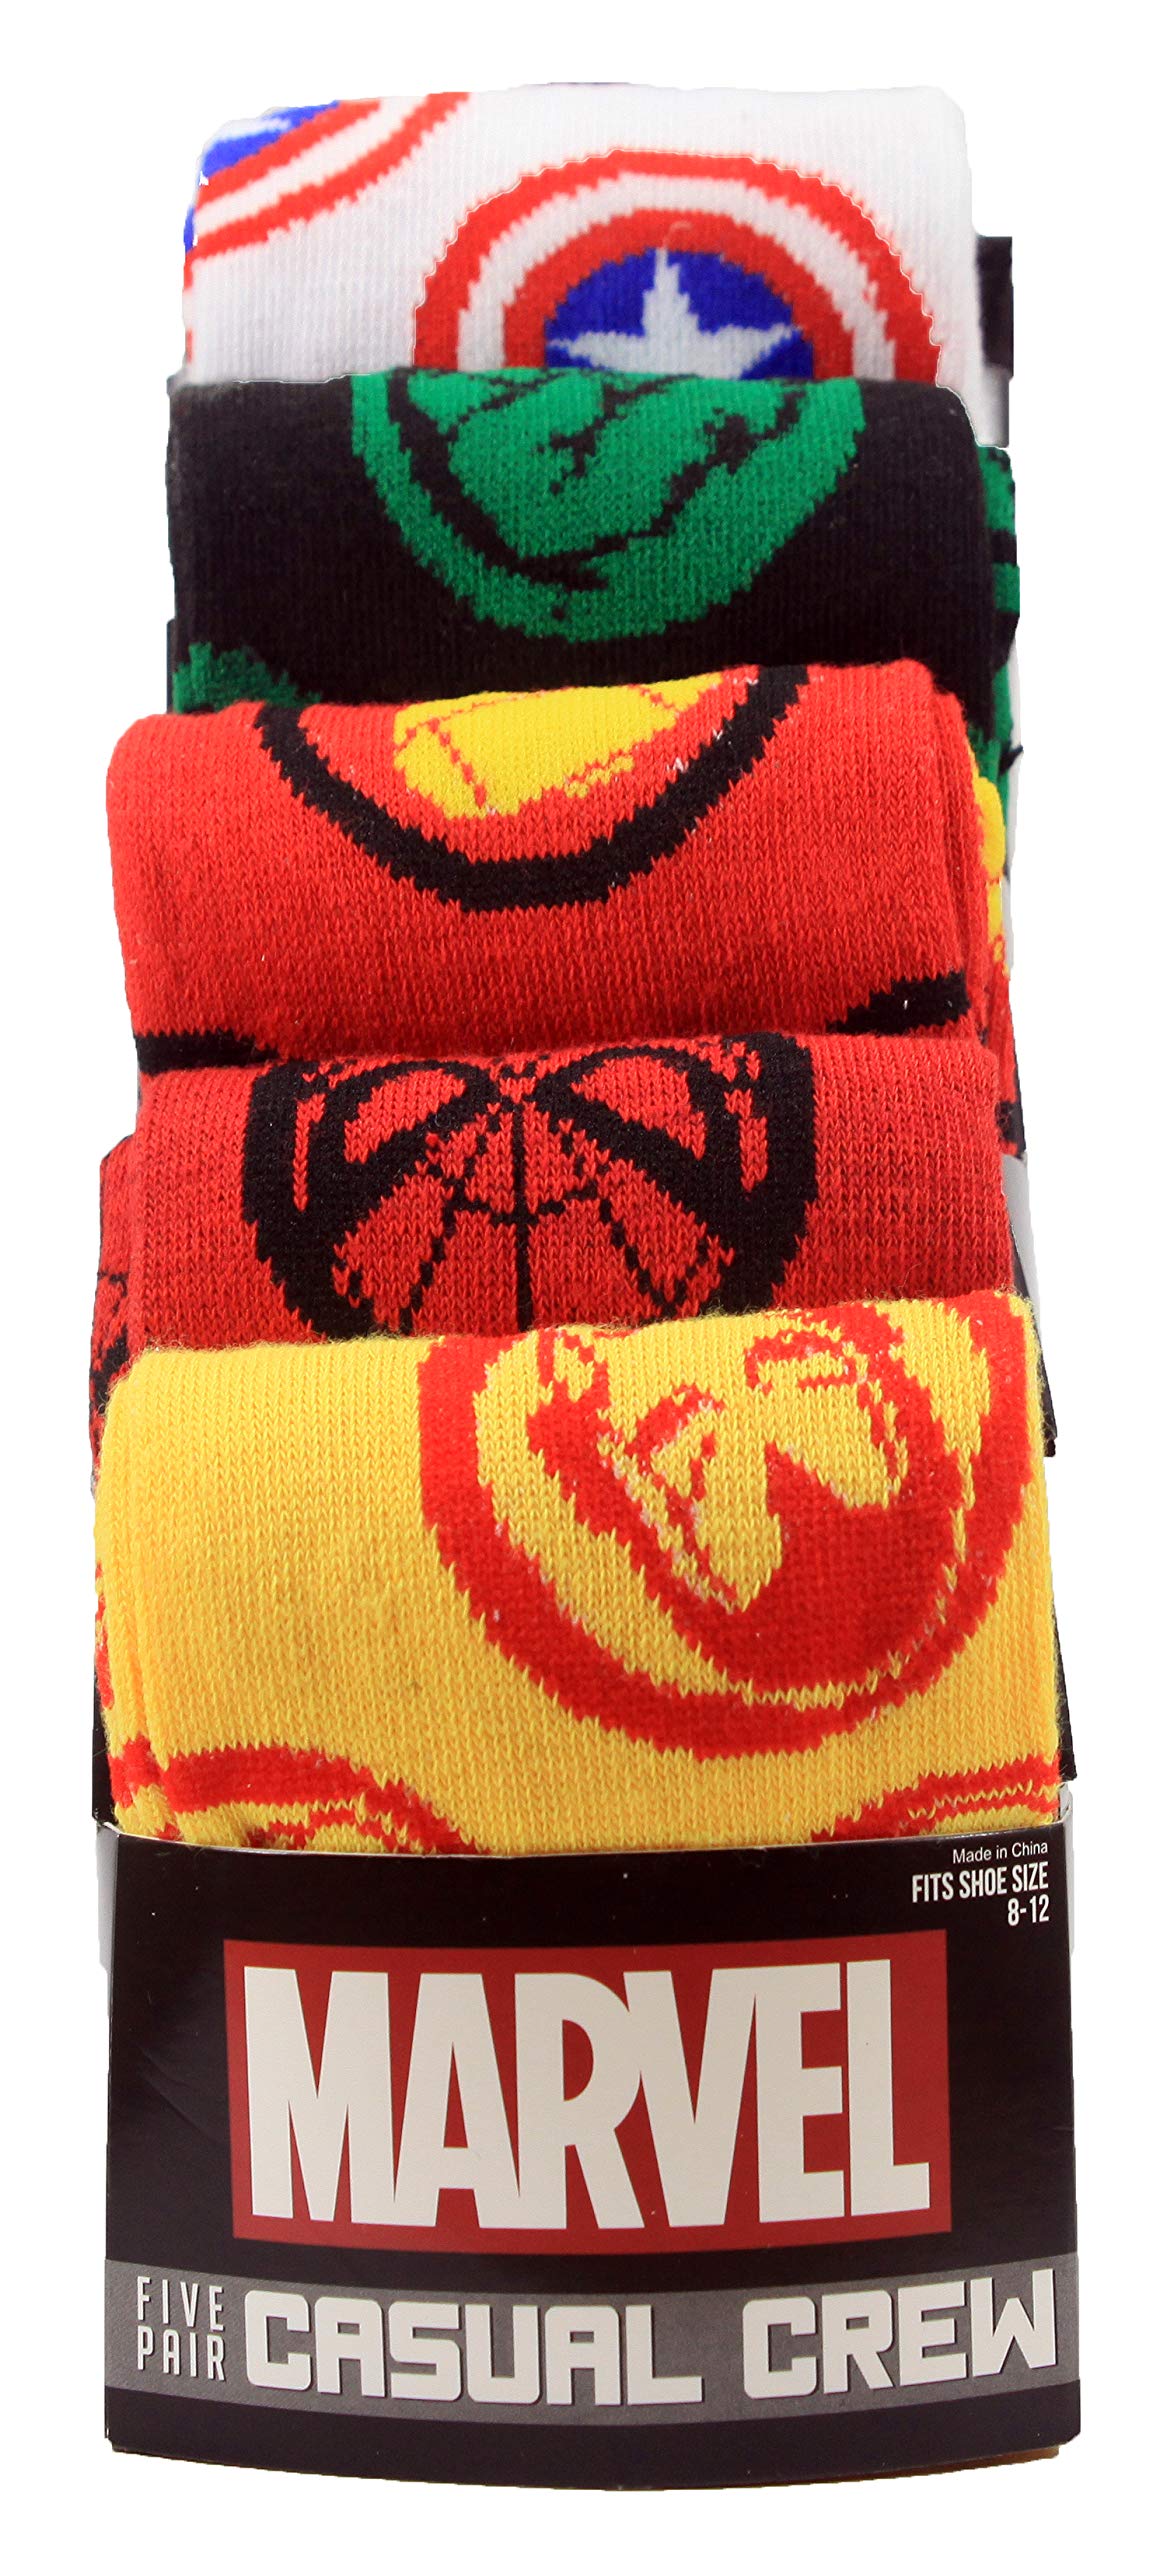 Bioworld Marvel Avengers Casual Crew Socks, Multicolored, Pack of 5, Size 8-12